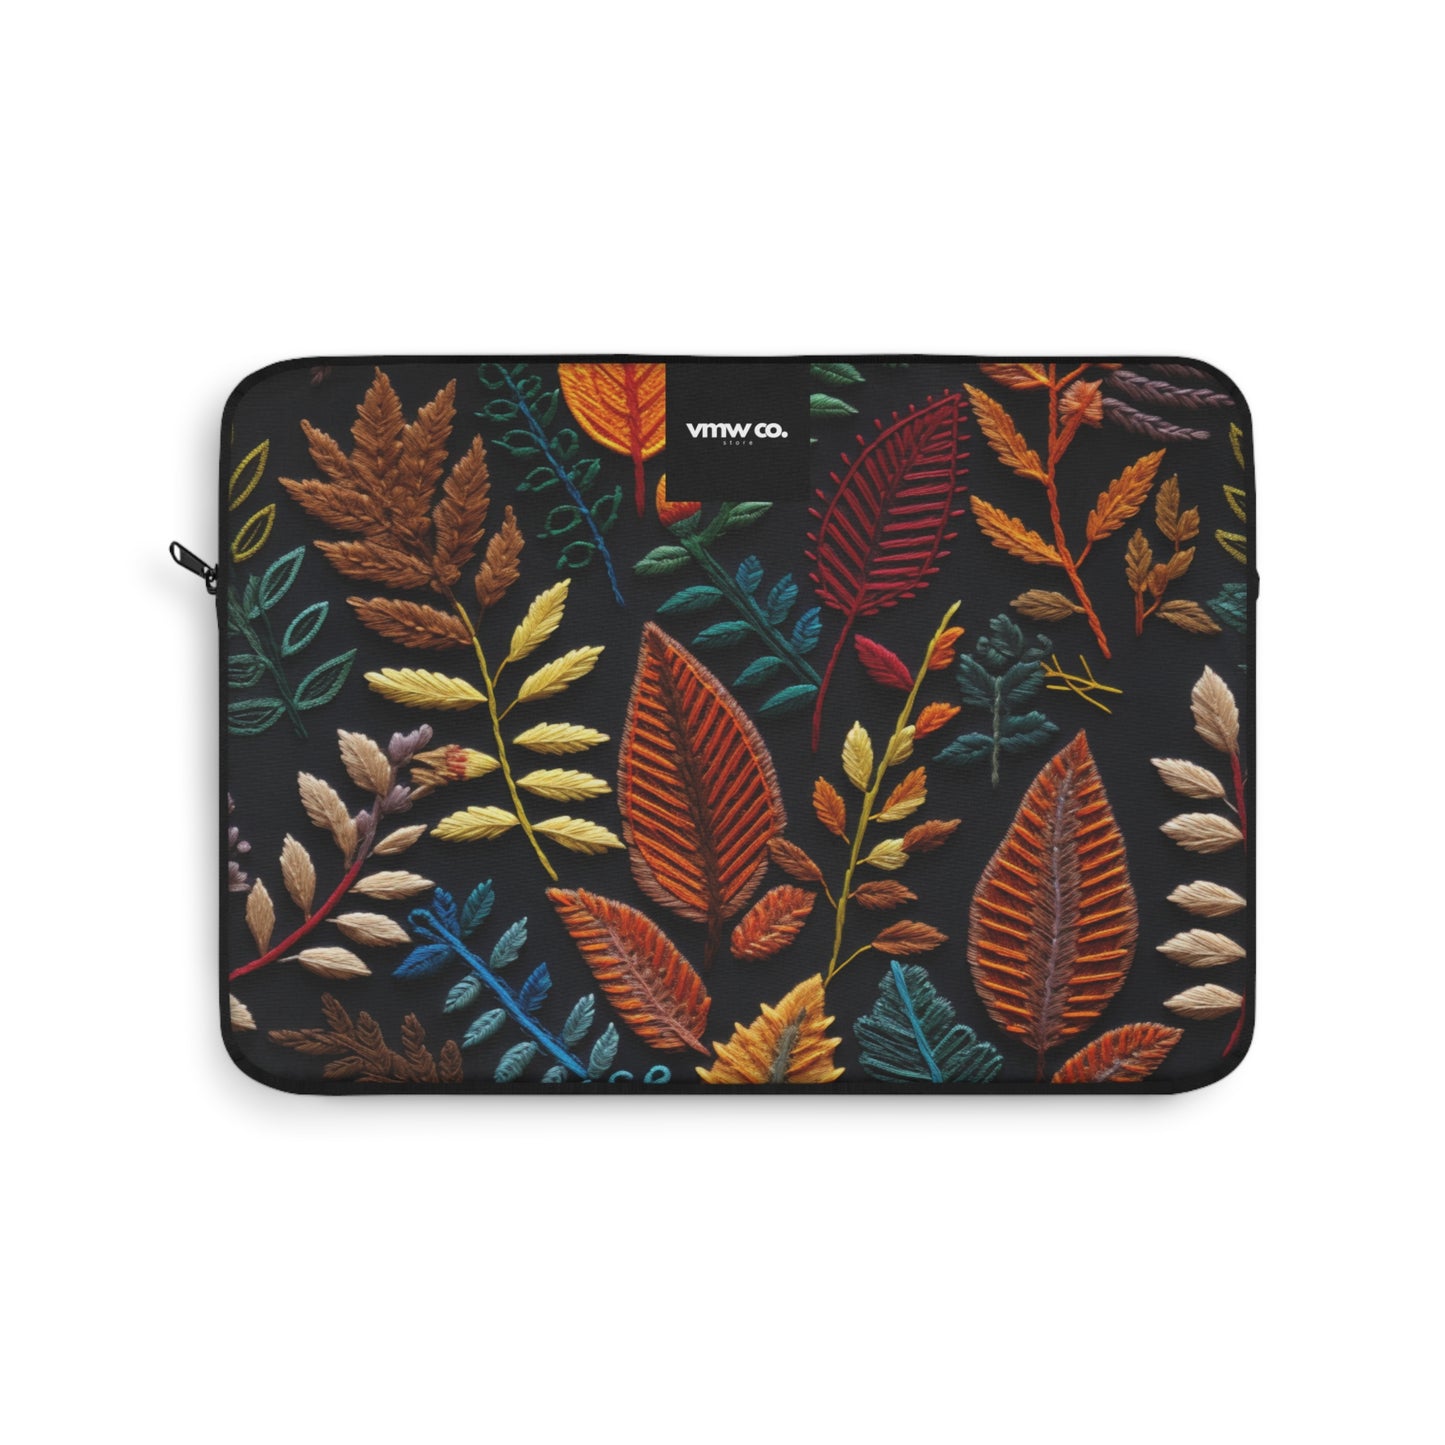 Embroidered Fall Leaves Laptop Sleeve